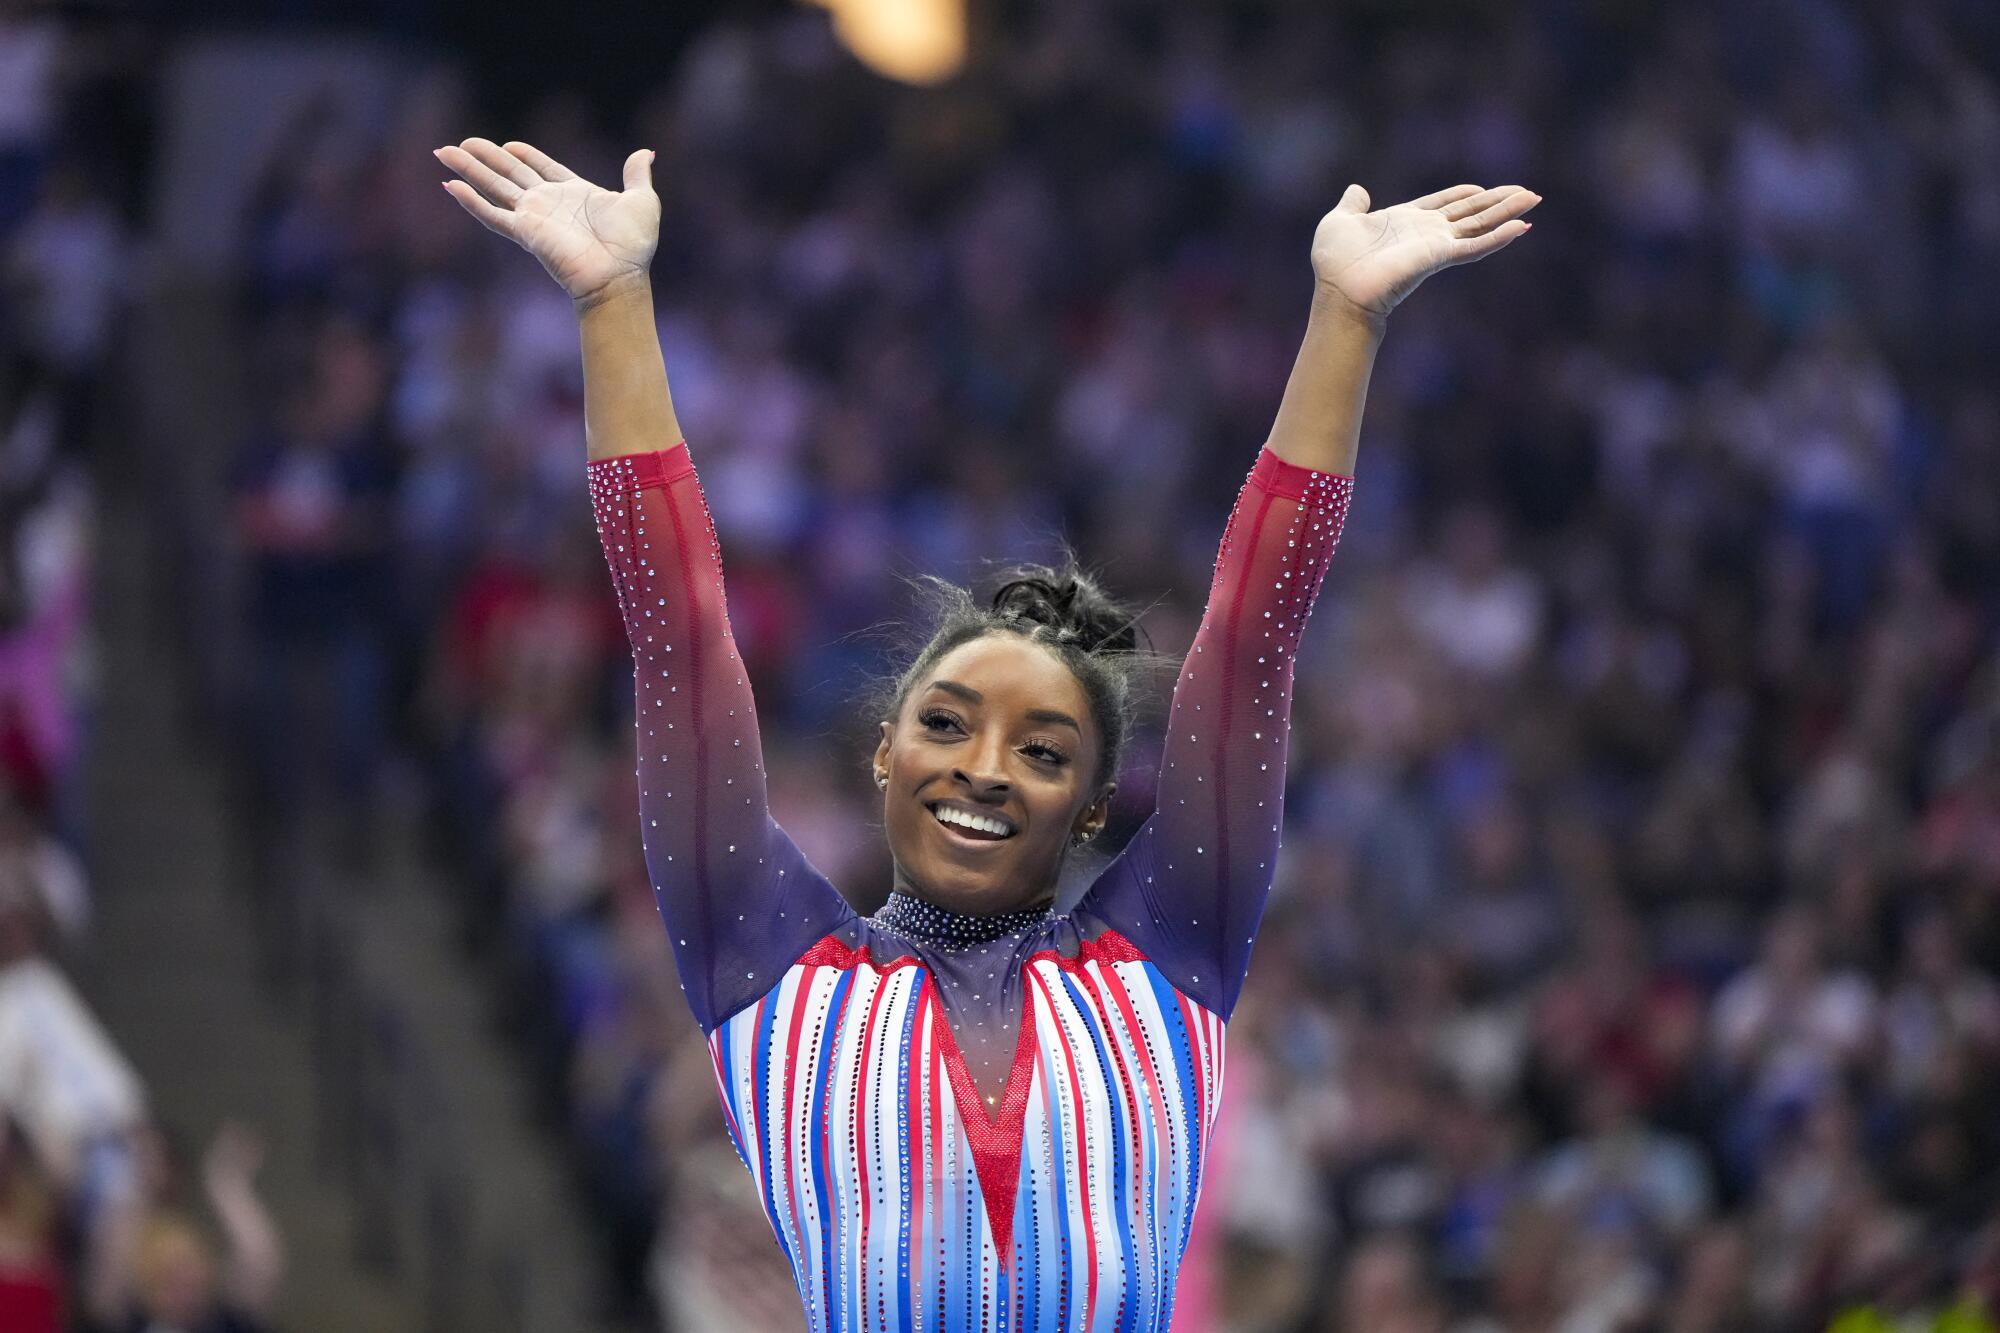 Simone Biles smiles with her hands in the air.